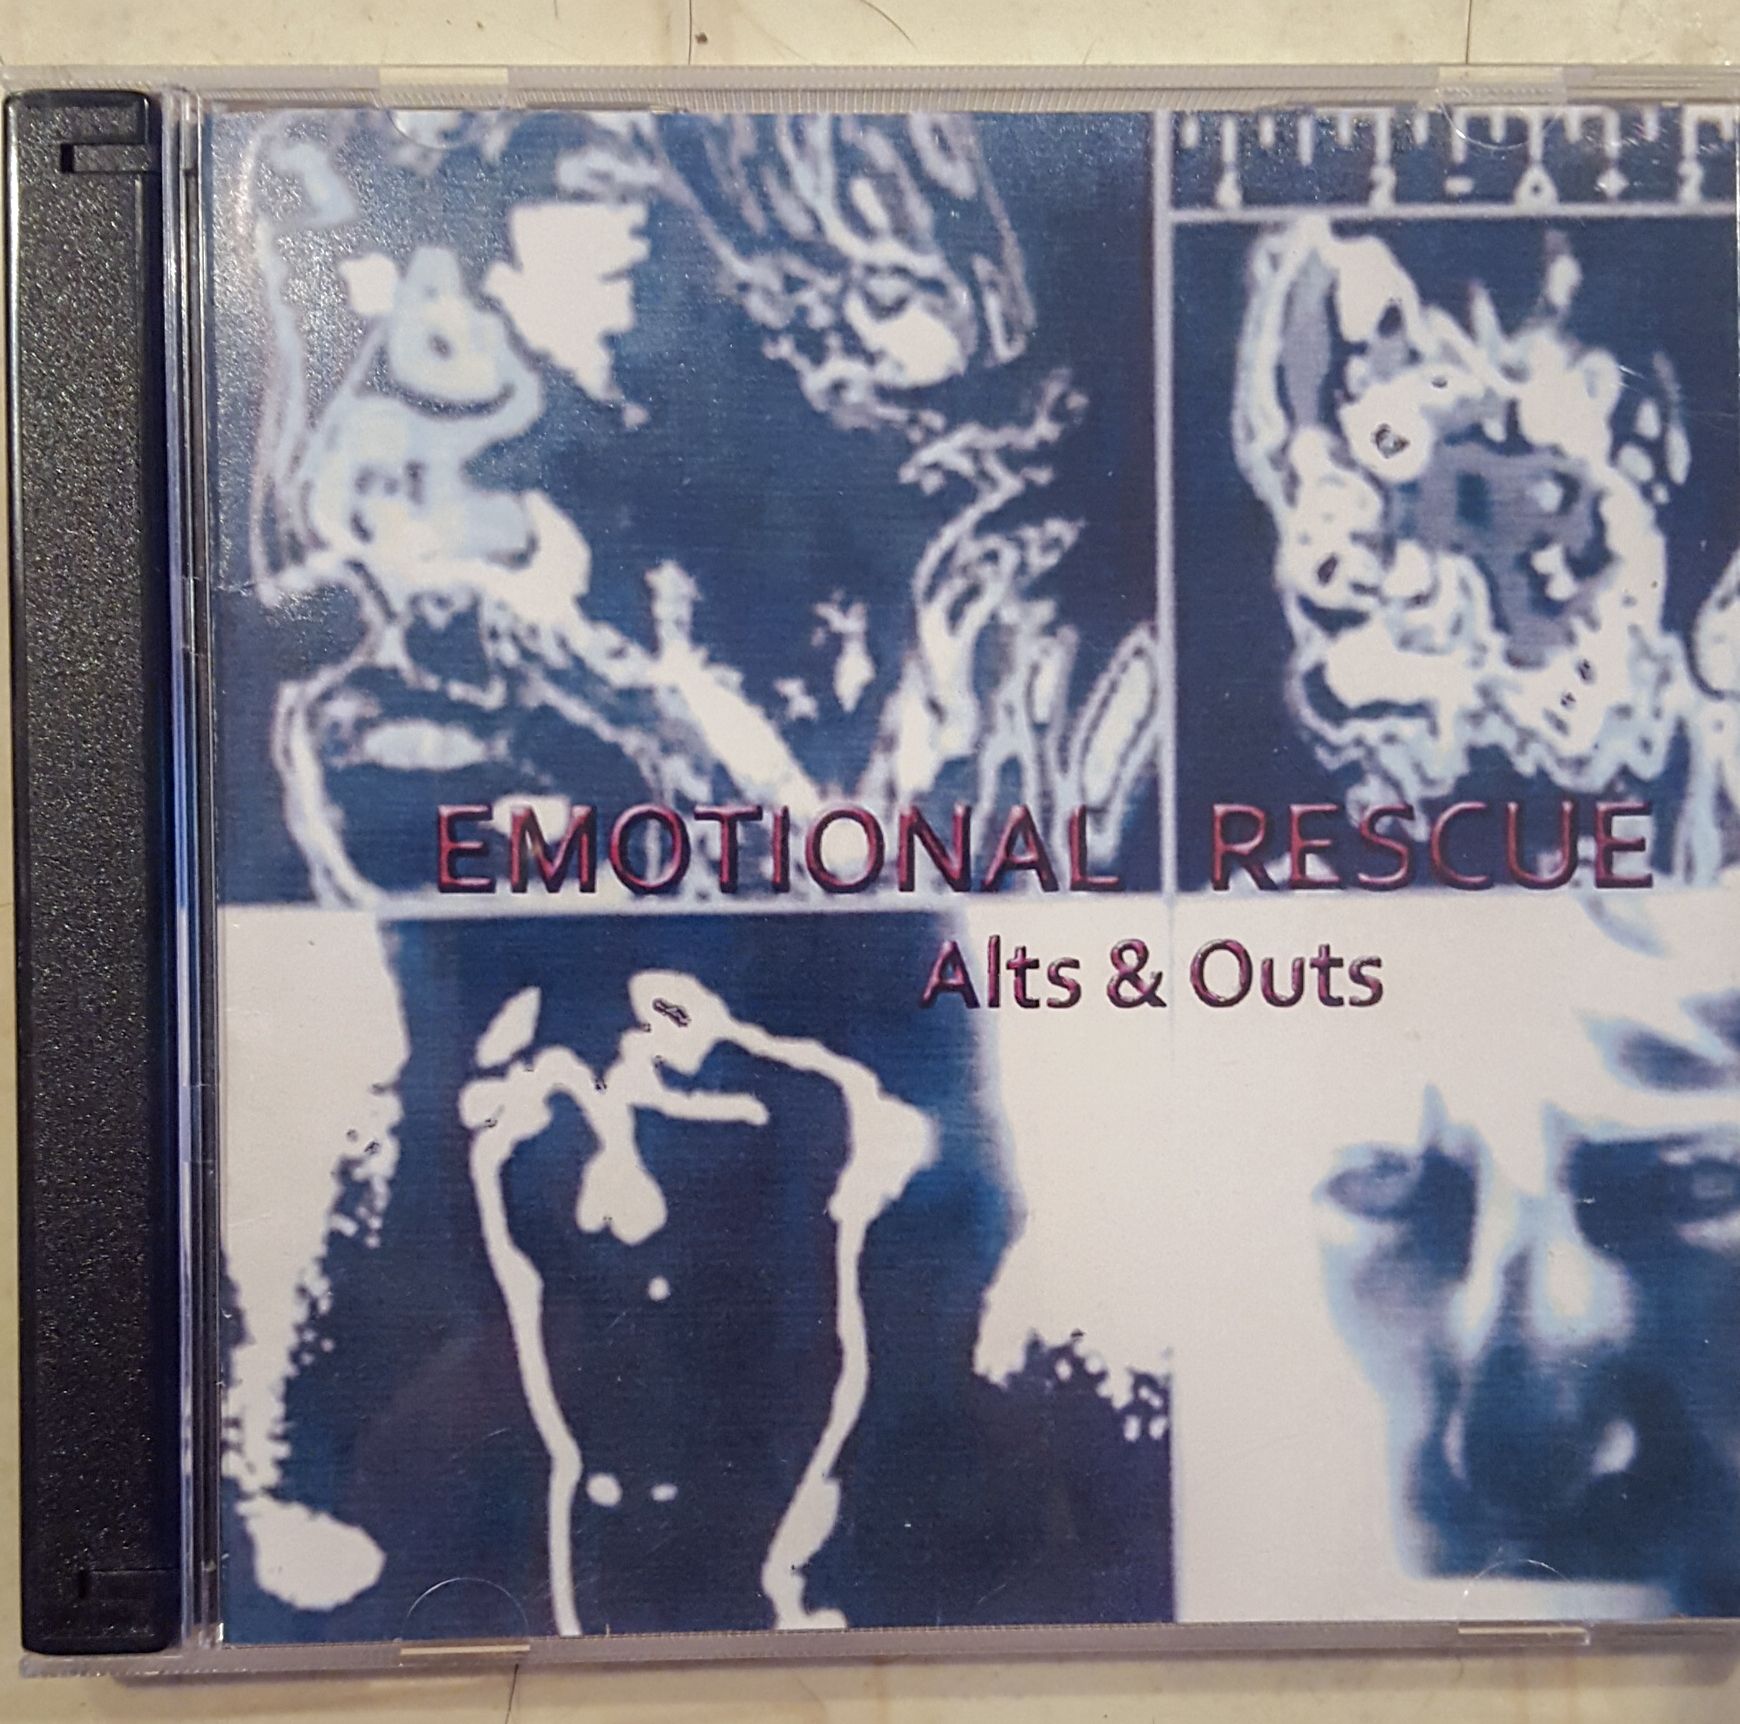 The Rolling Stones Emotional Rescue Alts and Outs 2 CD Set Brand New